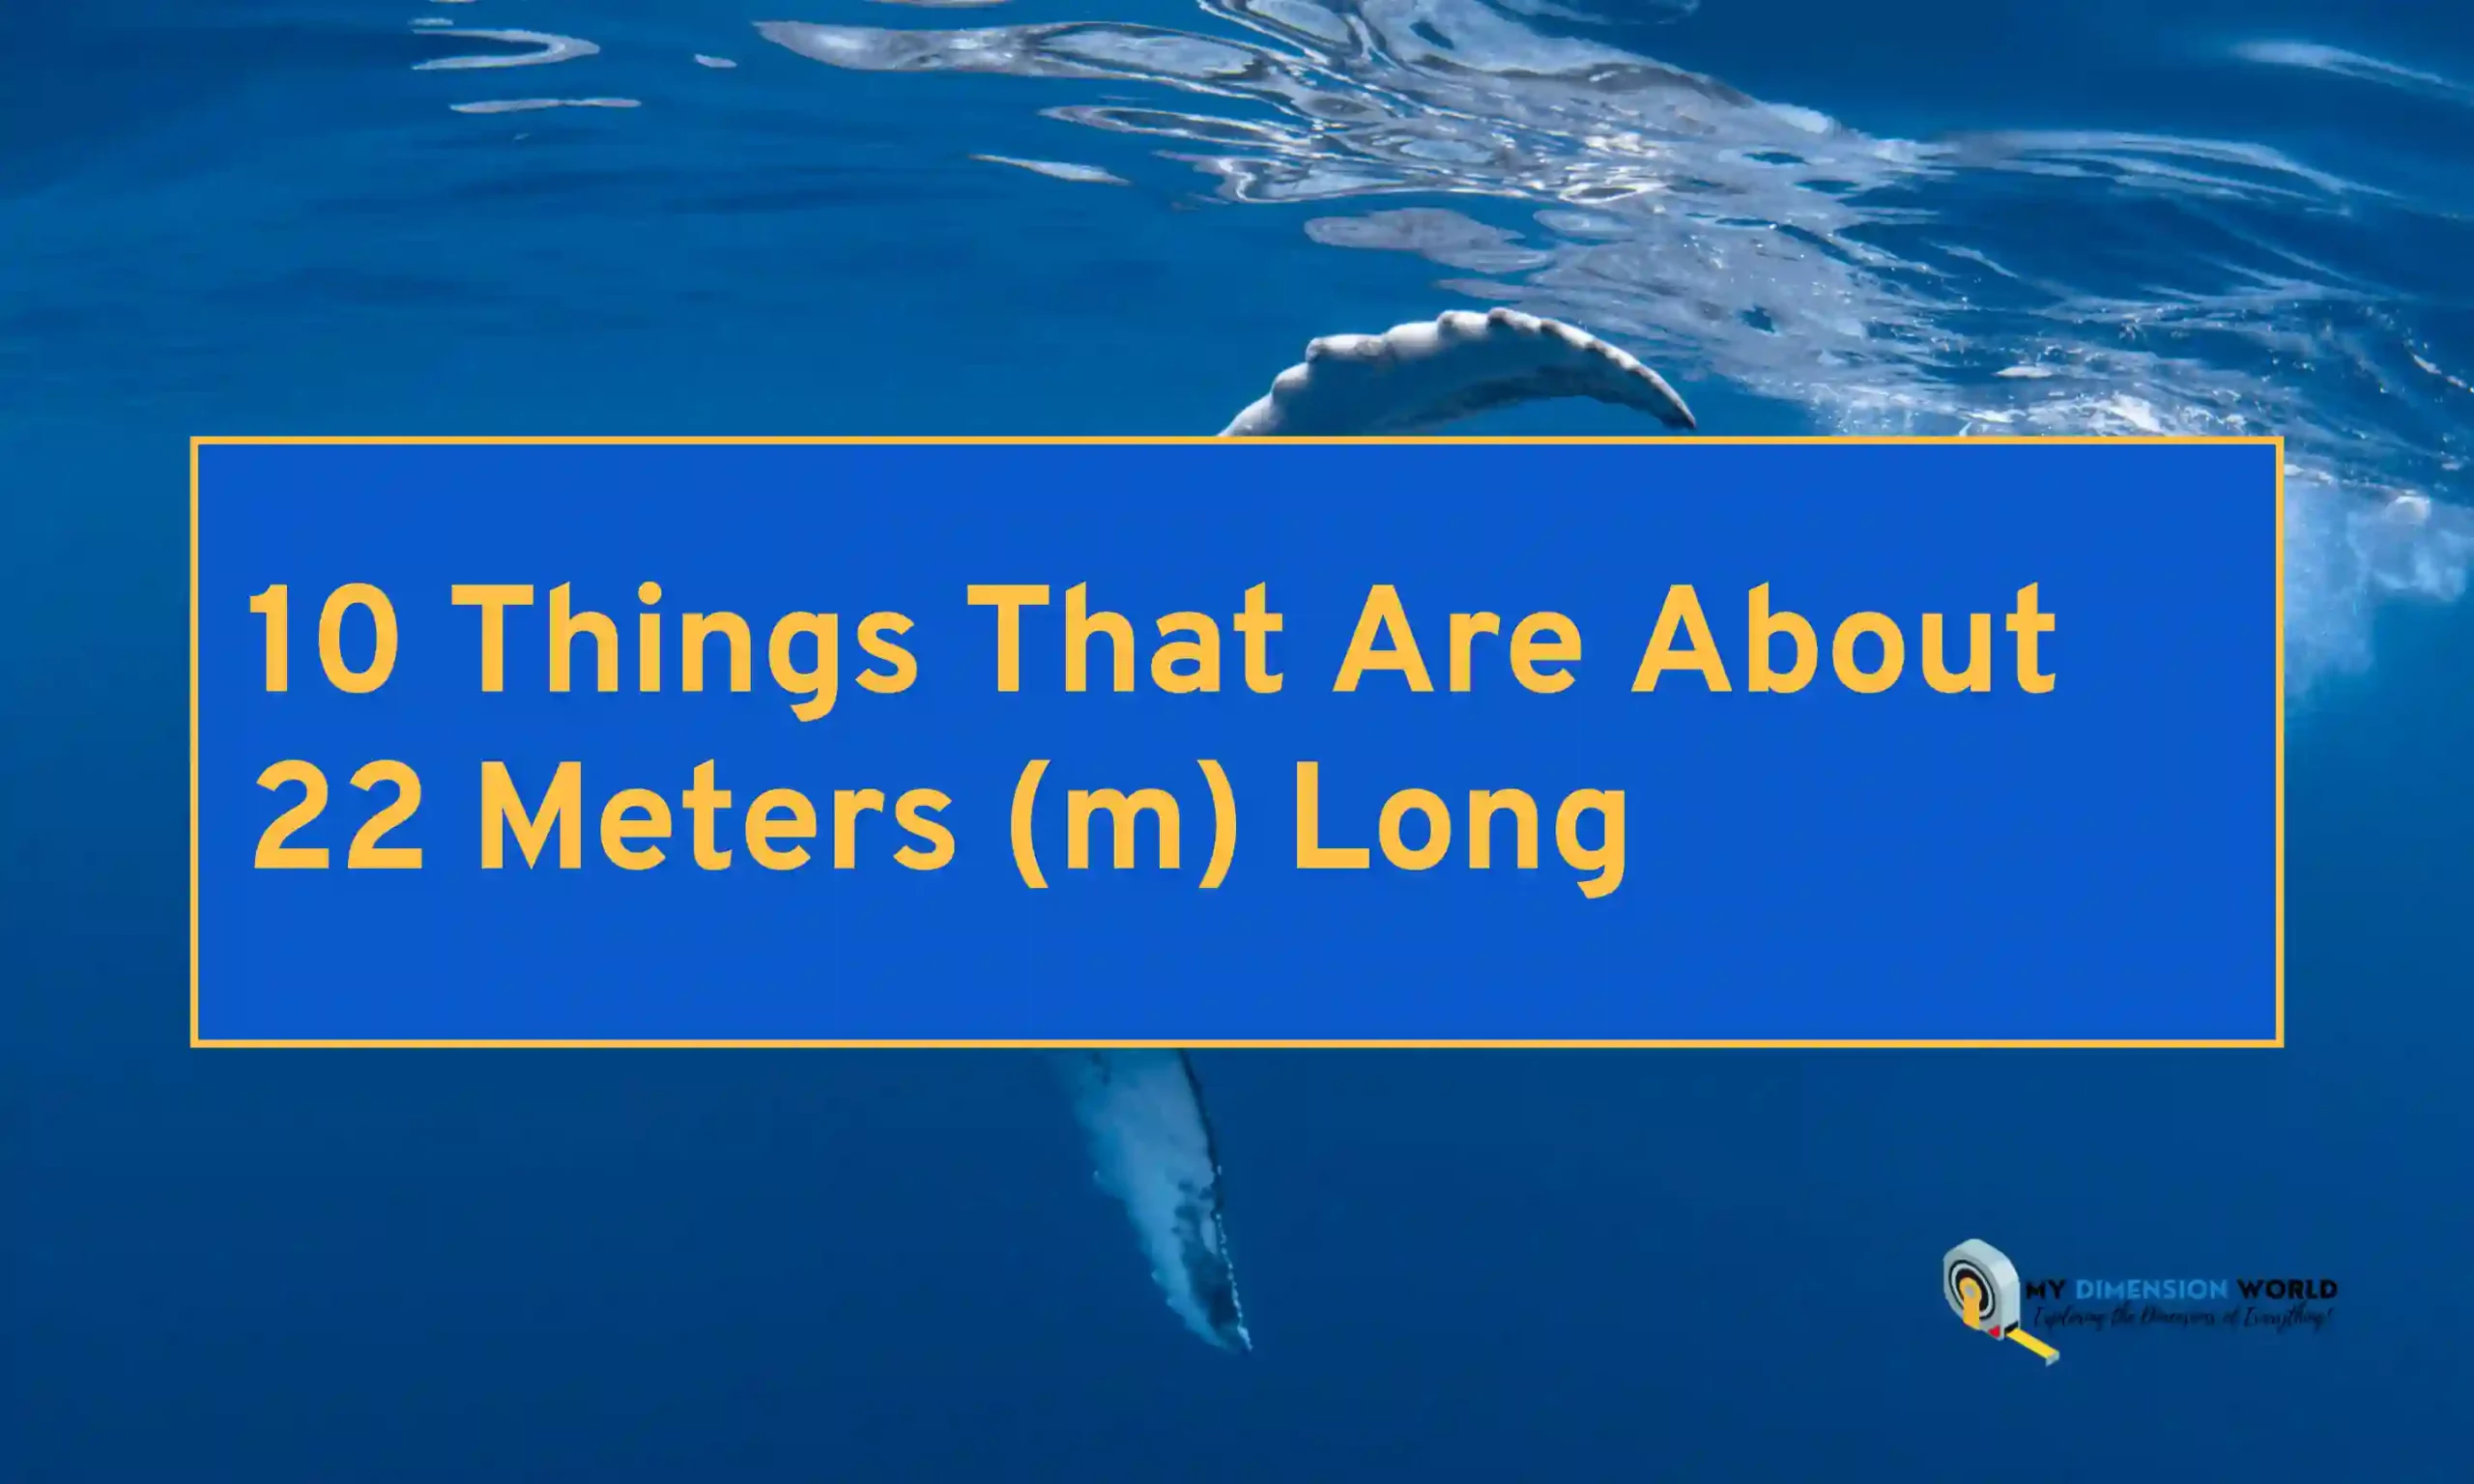 10 Things That Are About 22 Meters (m) Long